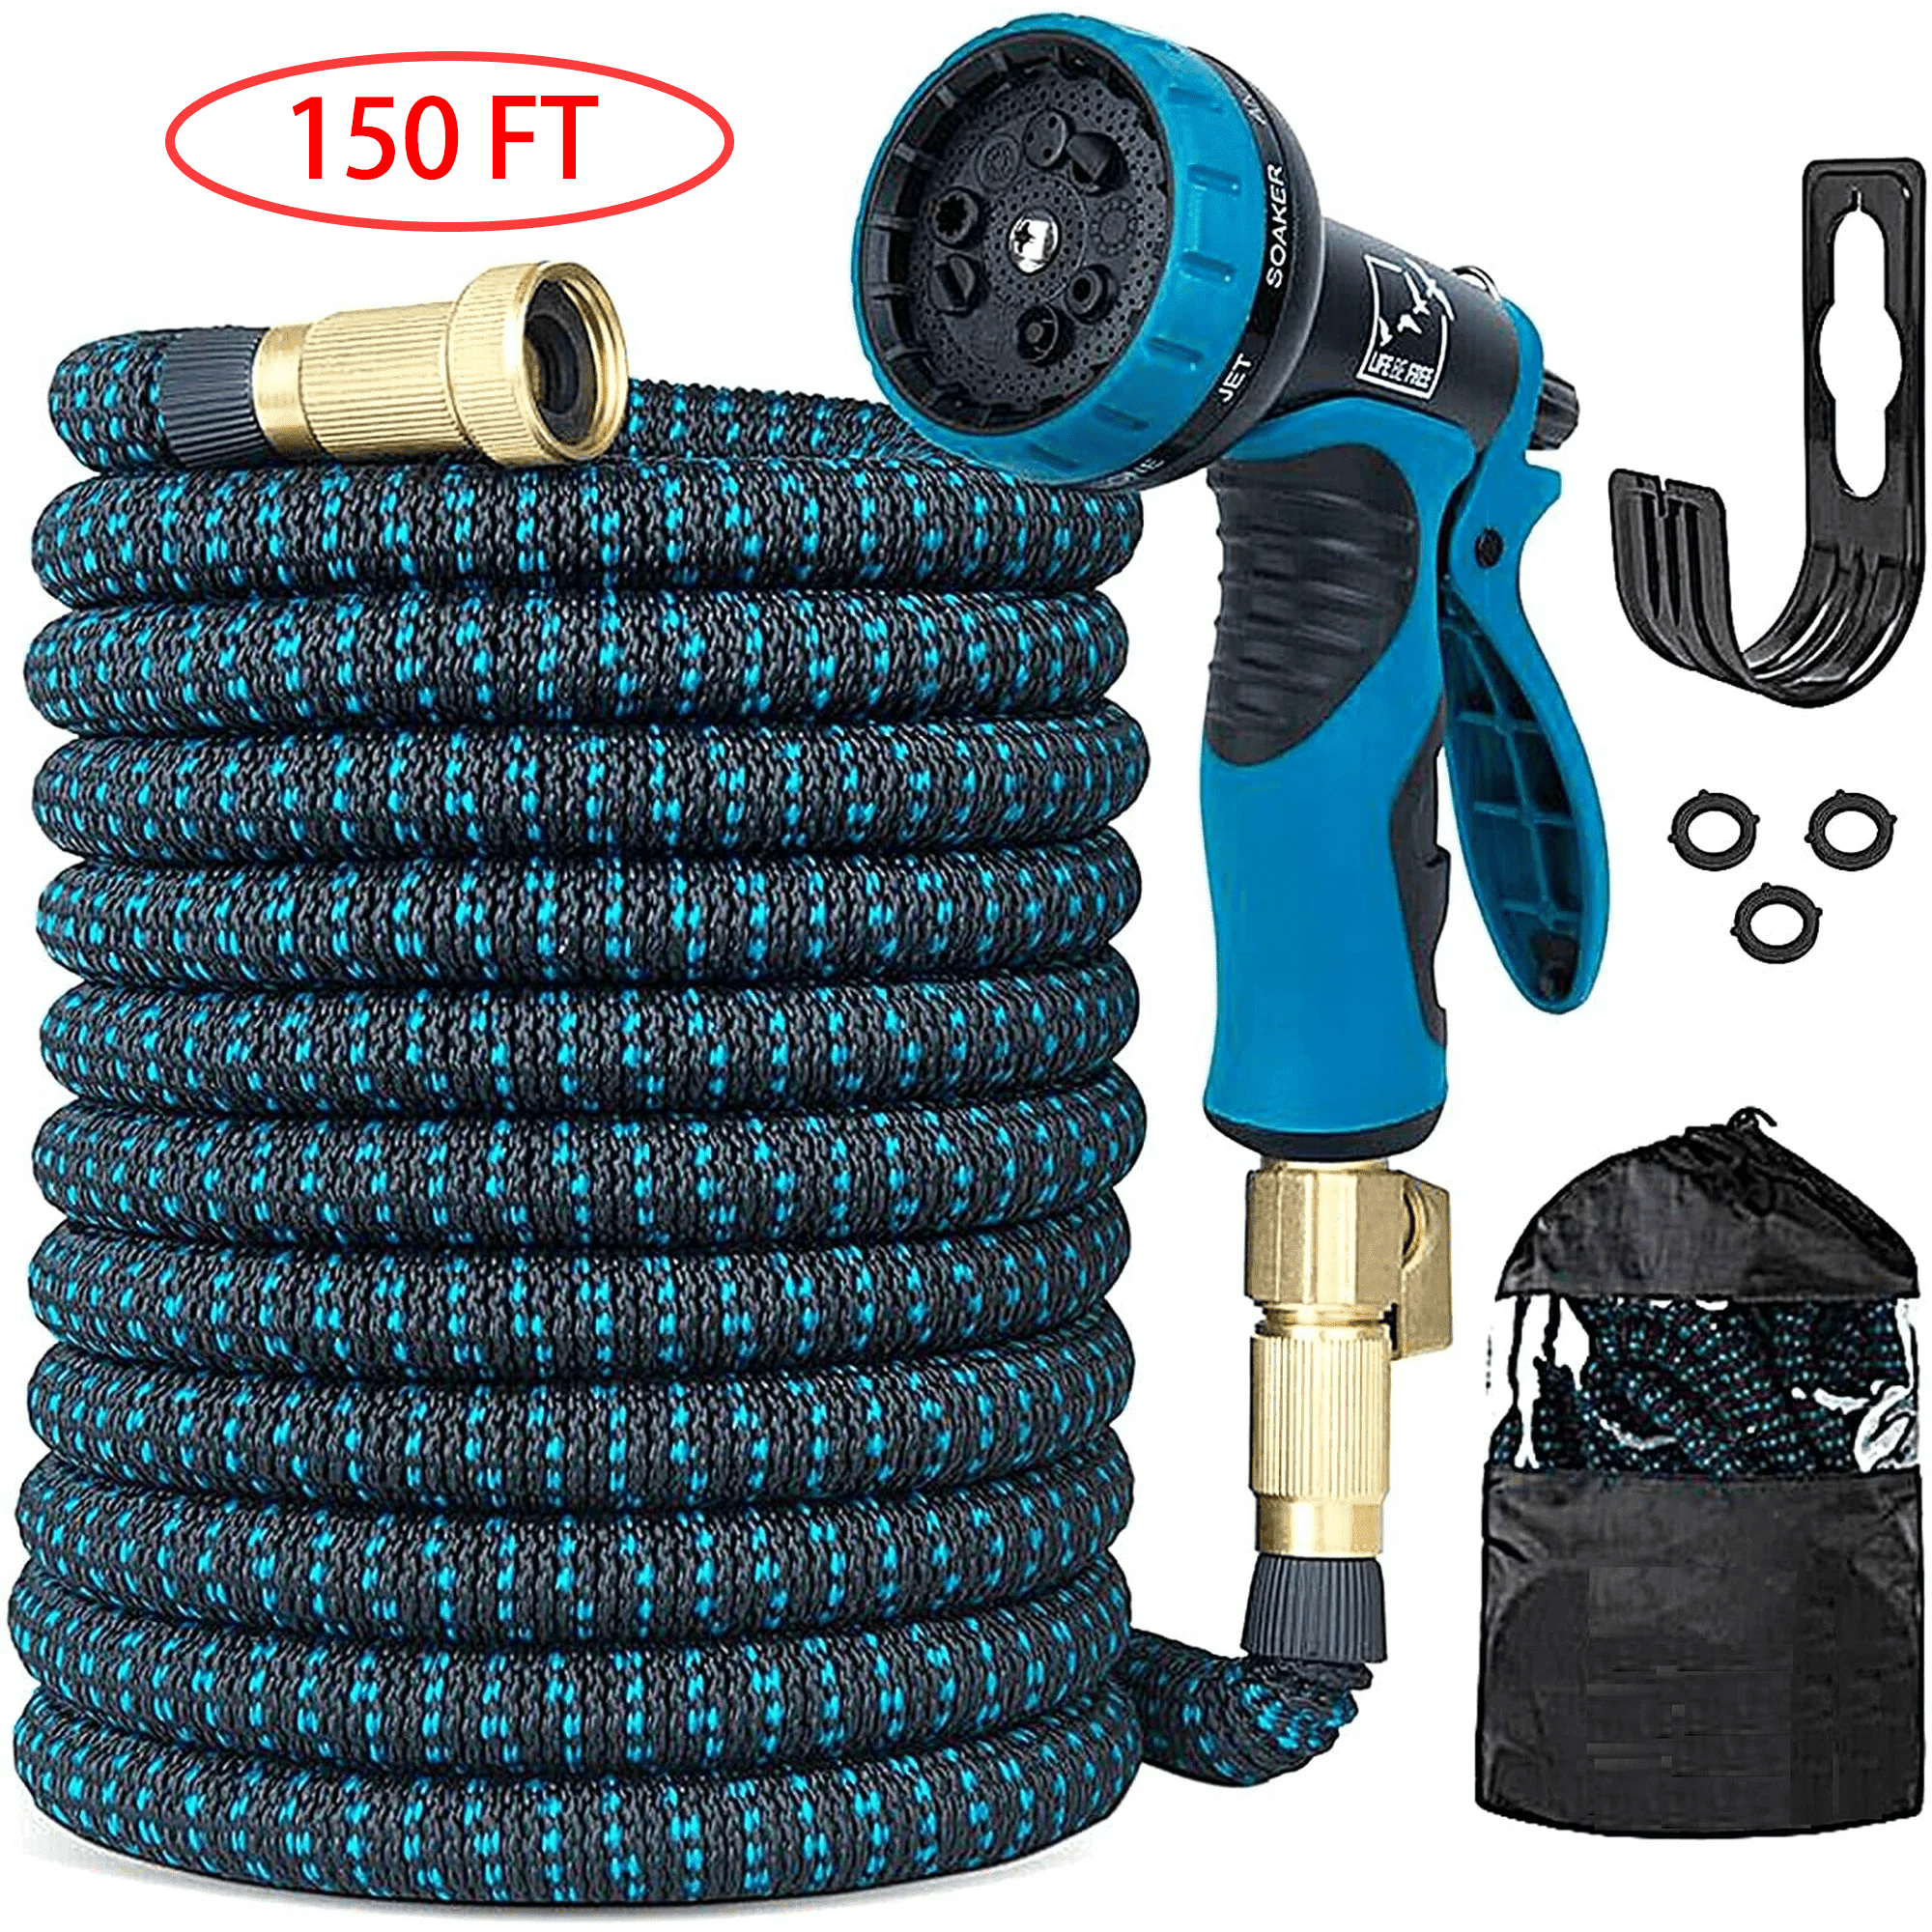 ODYSITE 25ft Garden Hose Water Pipe, Durable Water Hose with 7 Function  Nozzle, Portable Garden Hose for Gardening Lawn Car Pet Washing, Green 